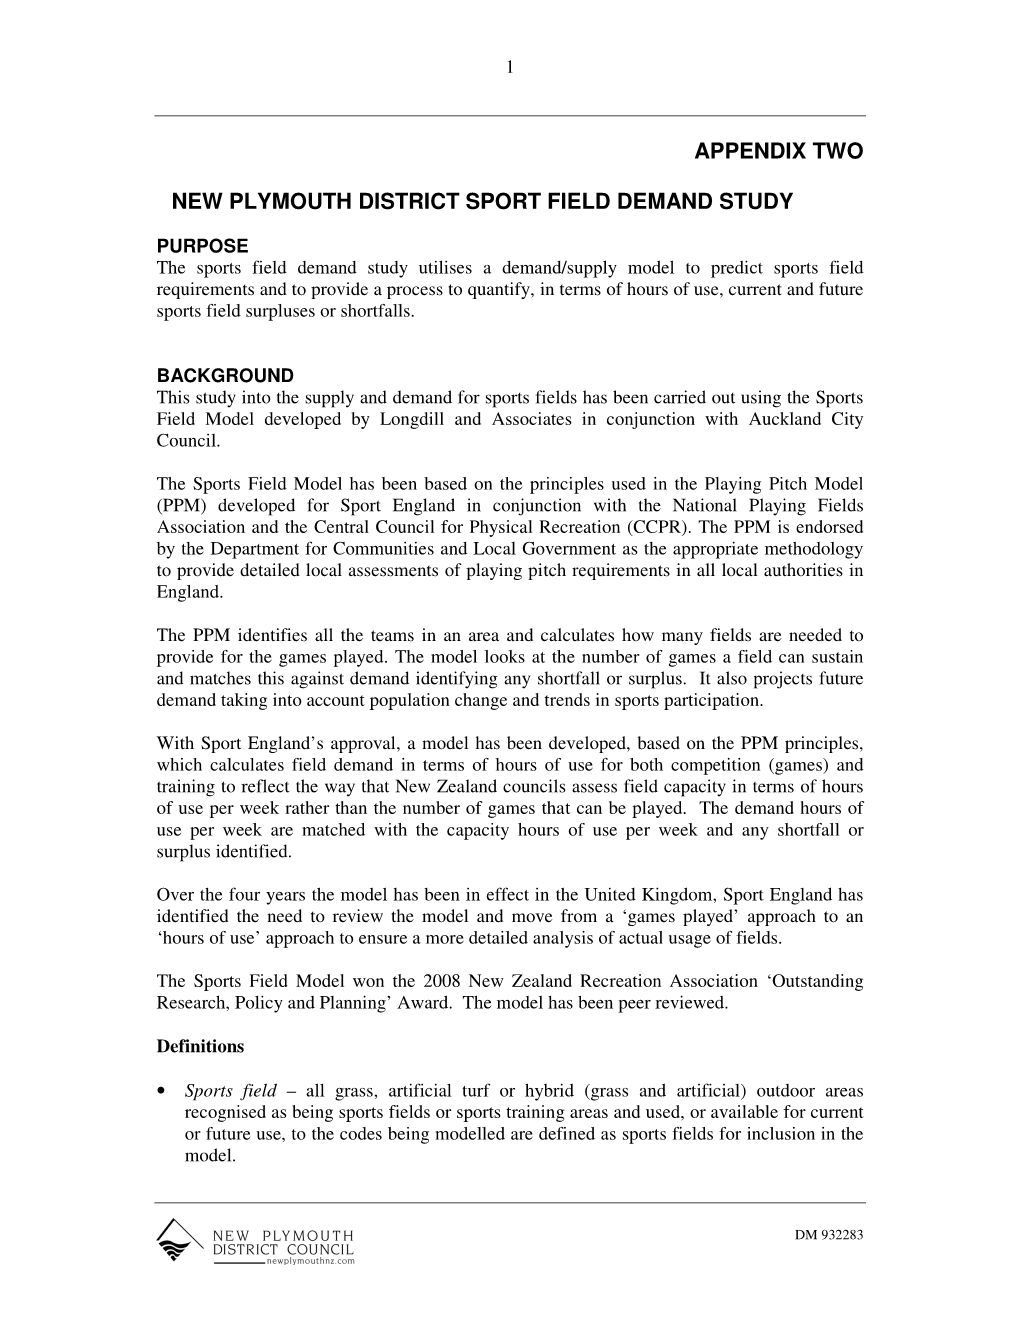 New Plymouth District Sport Field Demand Study